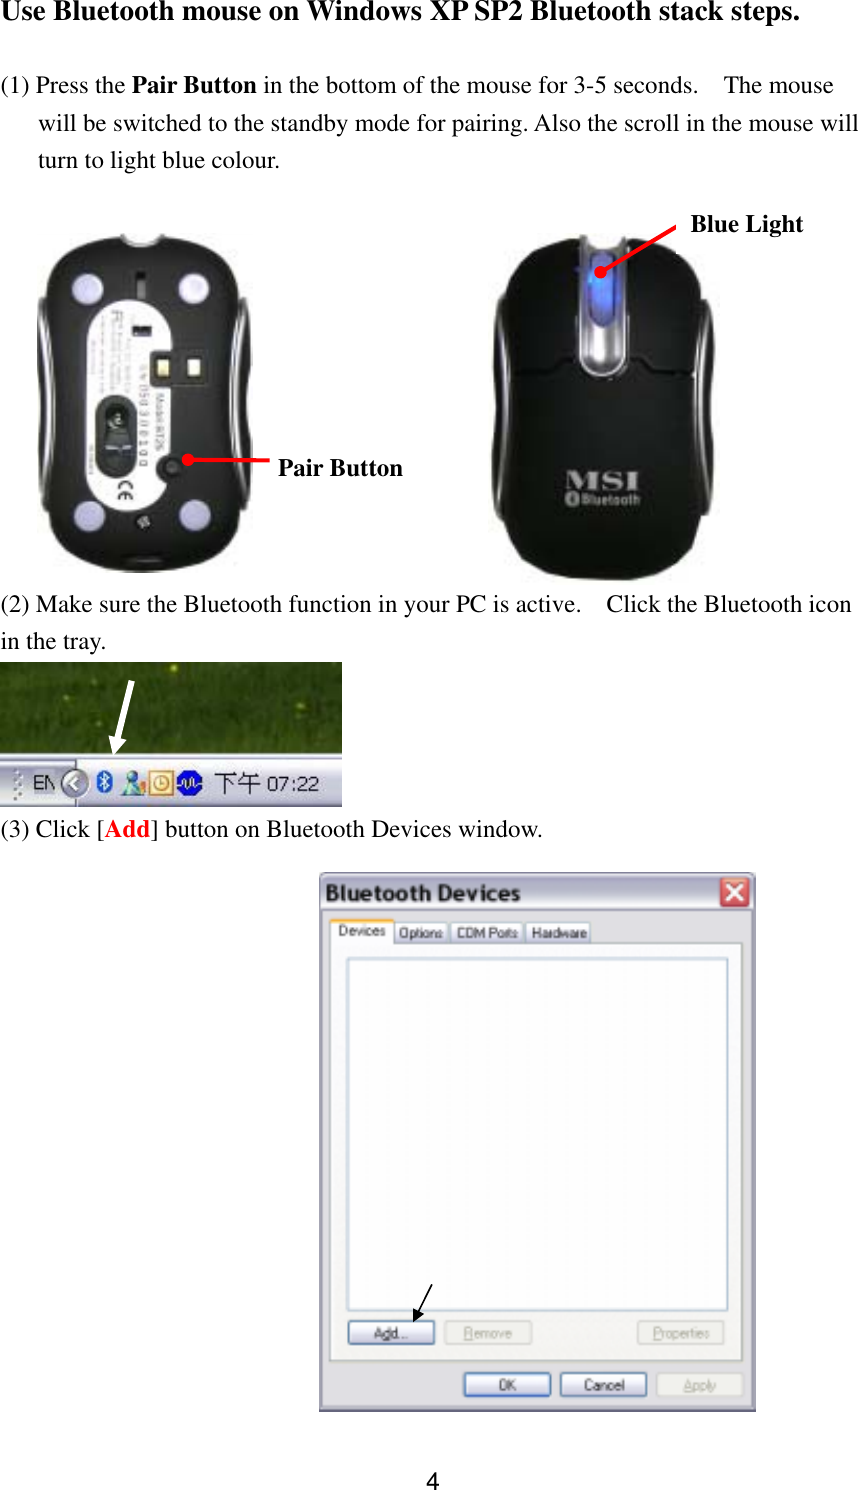  4Use Bluetooth mouse on Windows XP SP2 Bluetooth stack steps.  (1) Press the Pair Button in the bottom of the mouse for 3-5 seconds.    The mouse will be switched to the standby mode for pairing. Also the scroll in the mouse will turn to light blue colour.   (2) Make sure the Bluetooth function in your PC is active.    Click the Bluetooth icon in the tray.  (3) Click [Add] button on Bluetooth Devices window.   Blue Light Pair Button